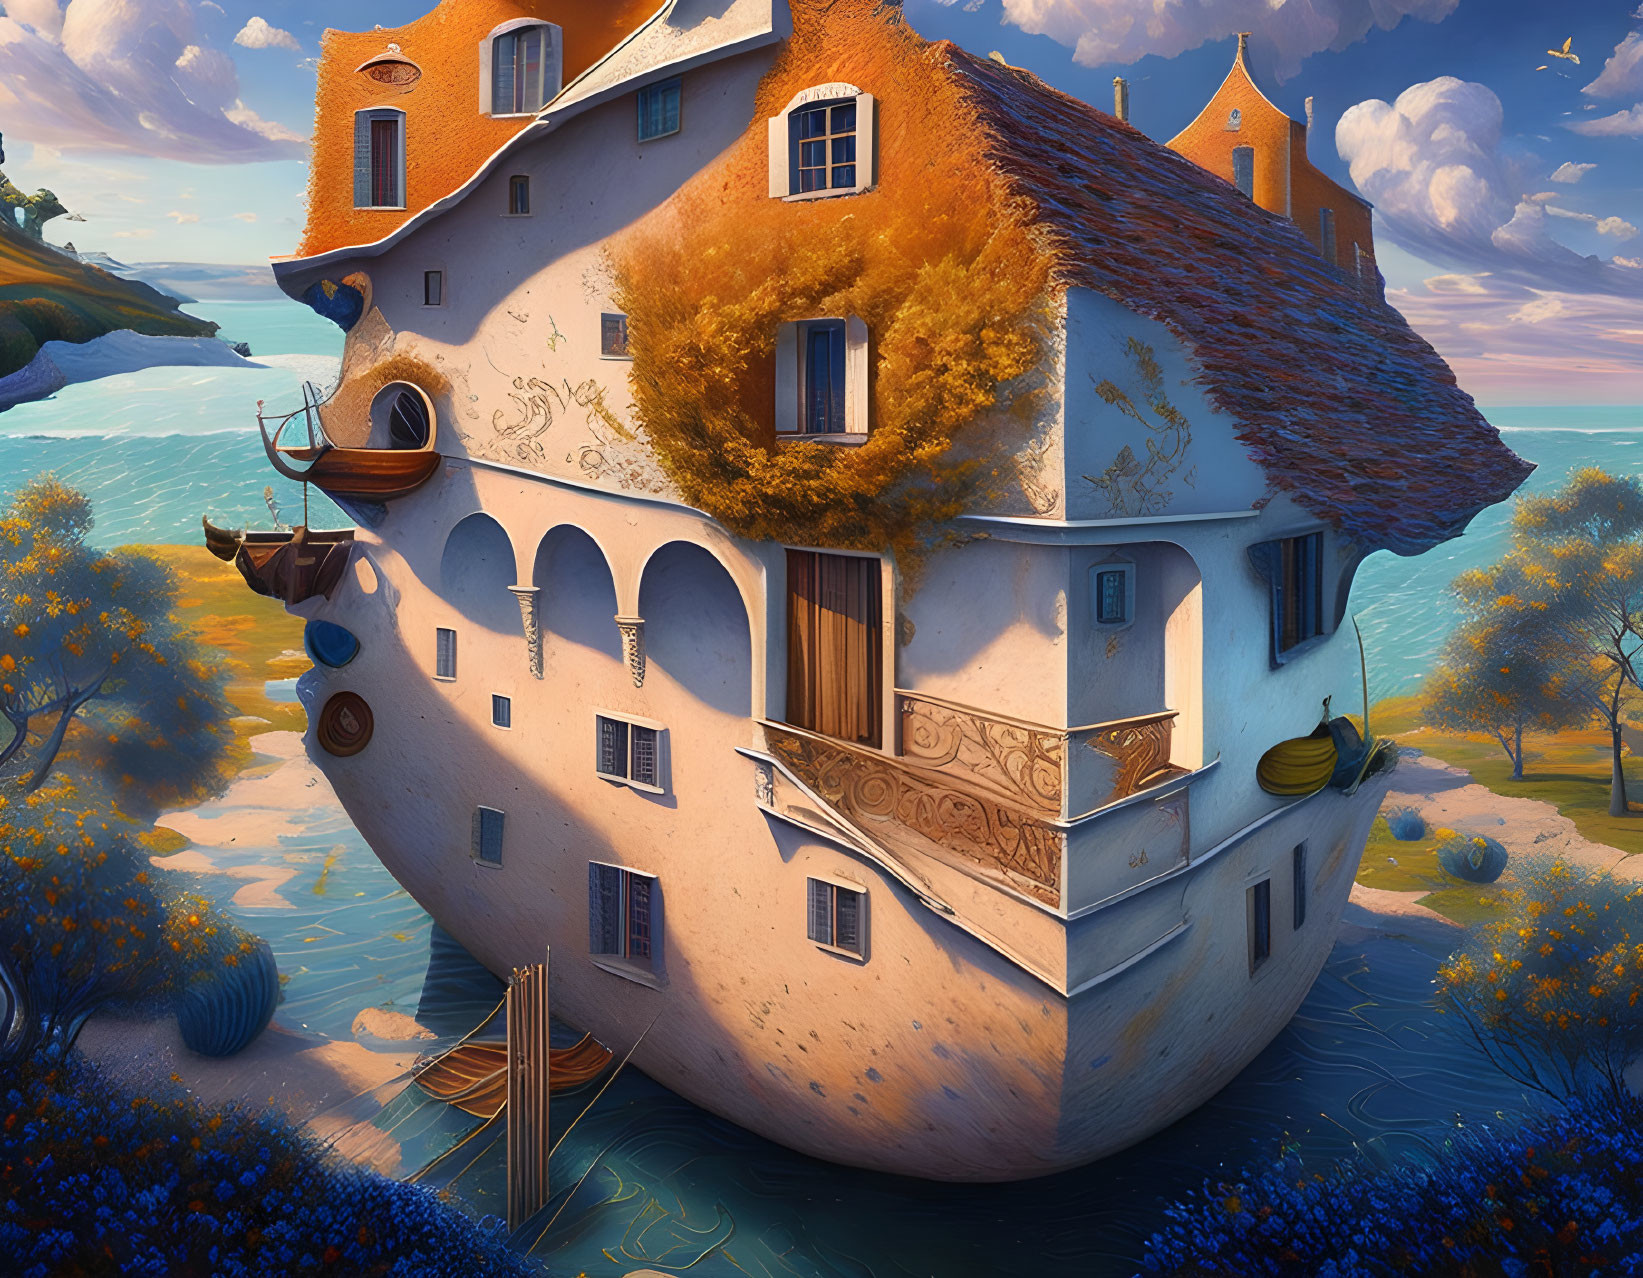 Large shoe-shaped house in blue flower landscape by calm sea at sunset